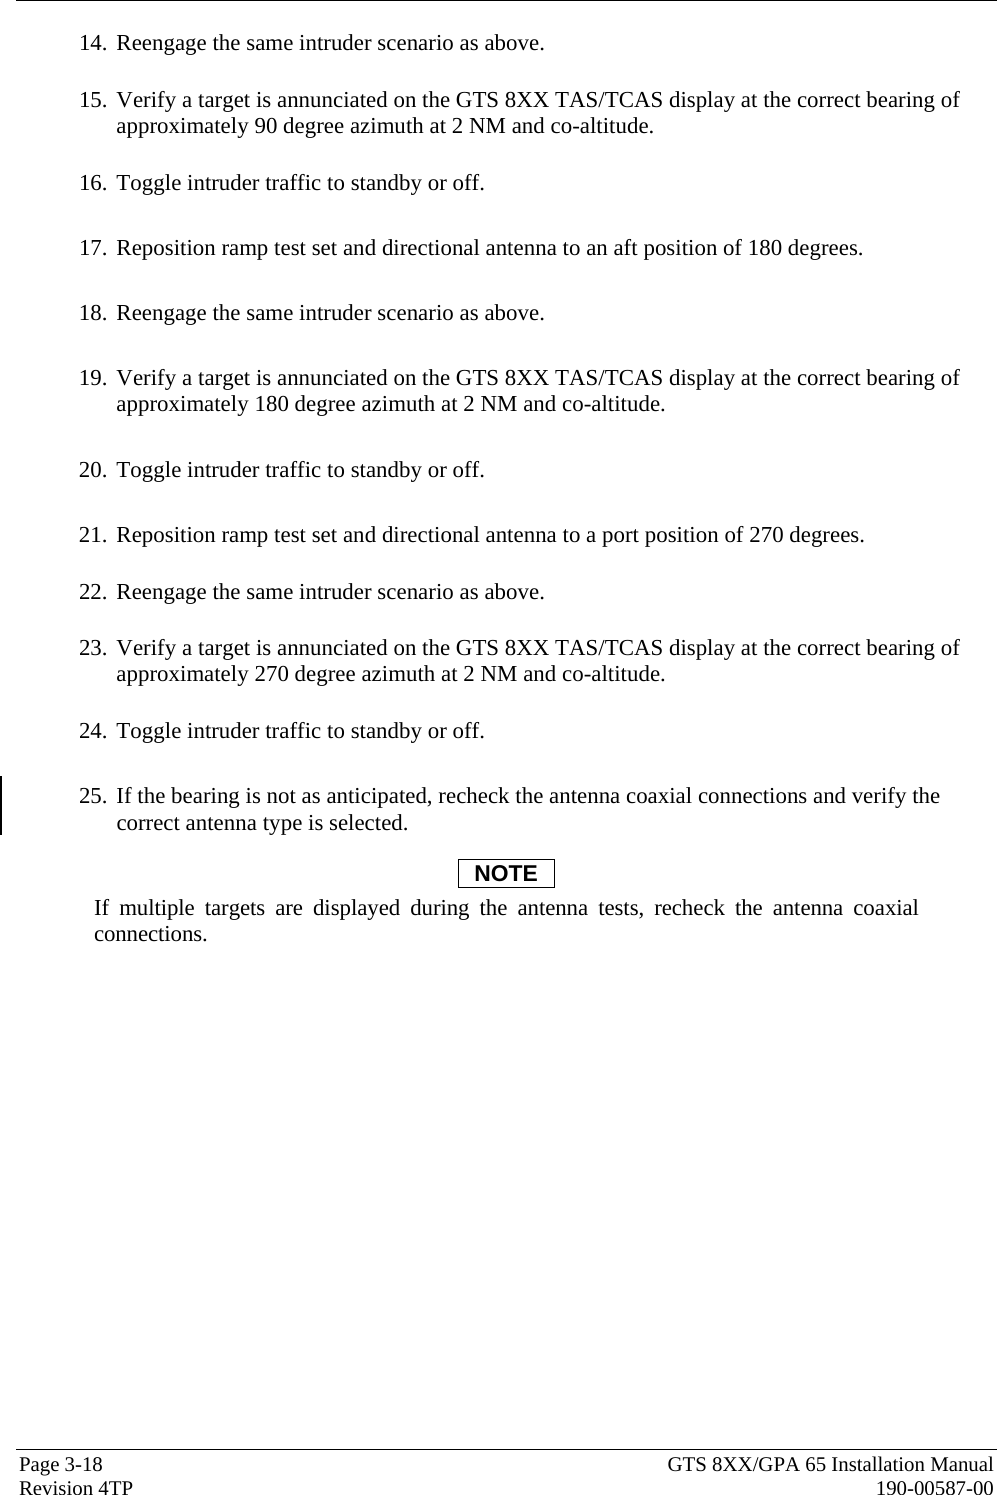  Page 3-18  GTS 8XX/GPA 65 Installation Manual Revision 4TP  190-00587-00 14. Reengage the same intruder scenario as above.    15. Verify a target is annunciated on the GTS 8XX TAS/TCAS display at the correct bearing of approximately 90 degree azimuth at 2 NM and co-altitude.    16. Toggle intruder traffic to standby or off.  17. Reposition ramp test set and directional antenna to an aft position of 180 degrees.    18. Reengage the same intruder scenario as above.  19. Verify a target is annunciated on the GTS 8XX TAS/TCAS display at the correct bearing of approximately 180 degree azimuth at 2 NM and co-altitude.   20. Toggle intruder traffic to standby or off.  21. Reposition ramp test set and directional antenna to a port position of 270 degrees.    22. Reengage the same intruder scenario as above.    23. Verify a target is annunciated on the GTS 8XX TAS/TCAS display at the correct bearing of approximately 270 degree azimuth at 2 NM and co-altitude.    24. Toggle intruder traffic to standby or off.  25. If the bearing is not as anticipated, recheck the antenna coaxial connections and verify the correct antenna type is selected.  NOTE If multiple targets are displayed during the antenna tests, recheck the antenna coaxial connections.  